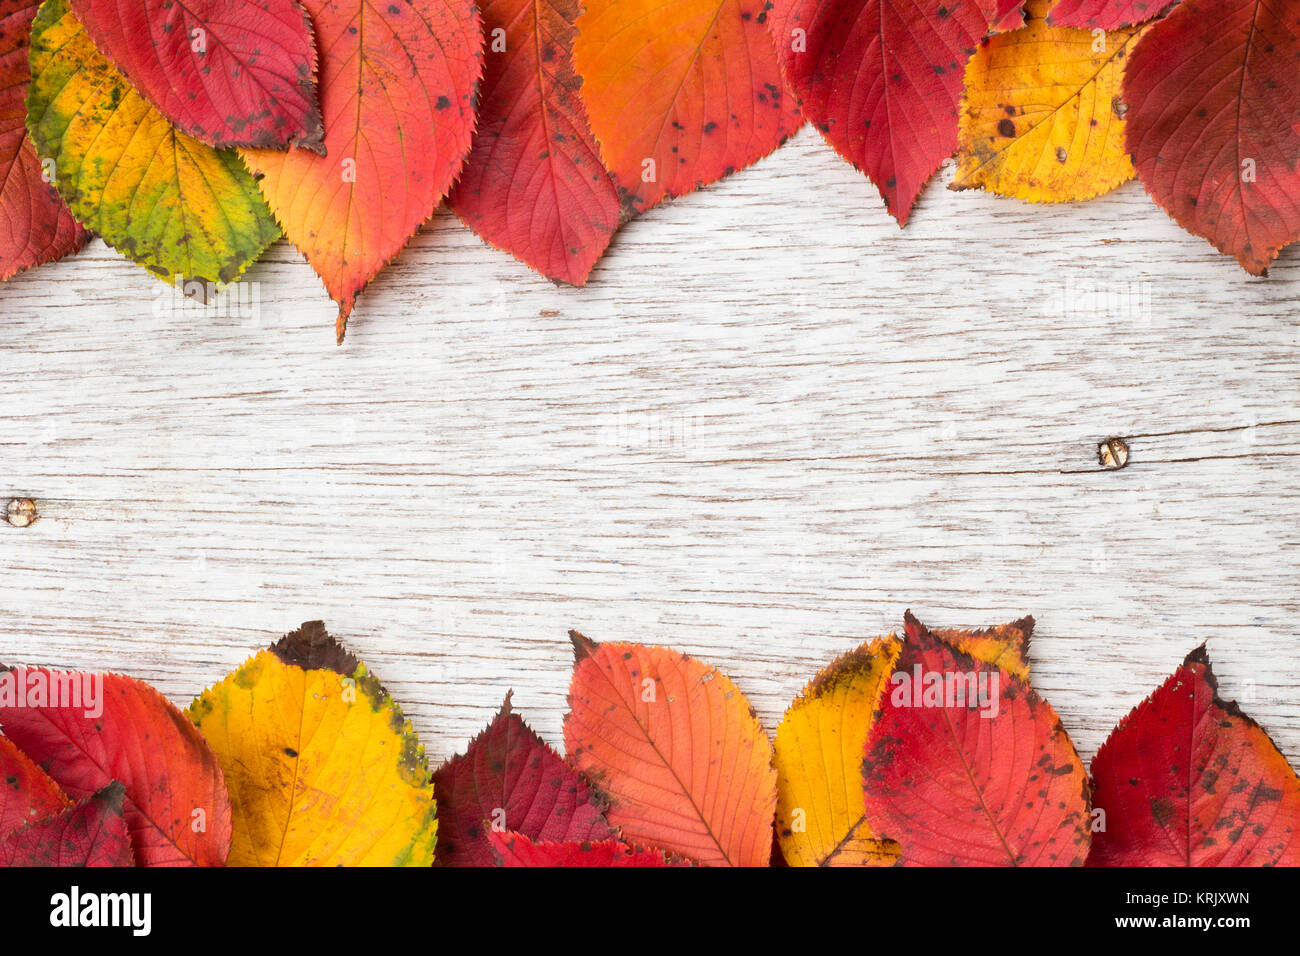 Frame made of red fall leaves on a wooden board Stock Photo